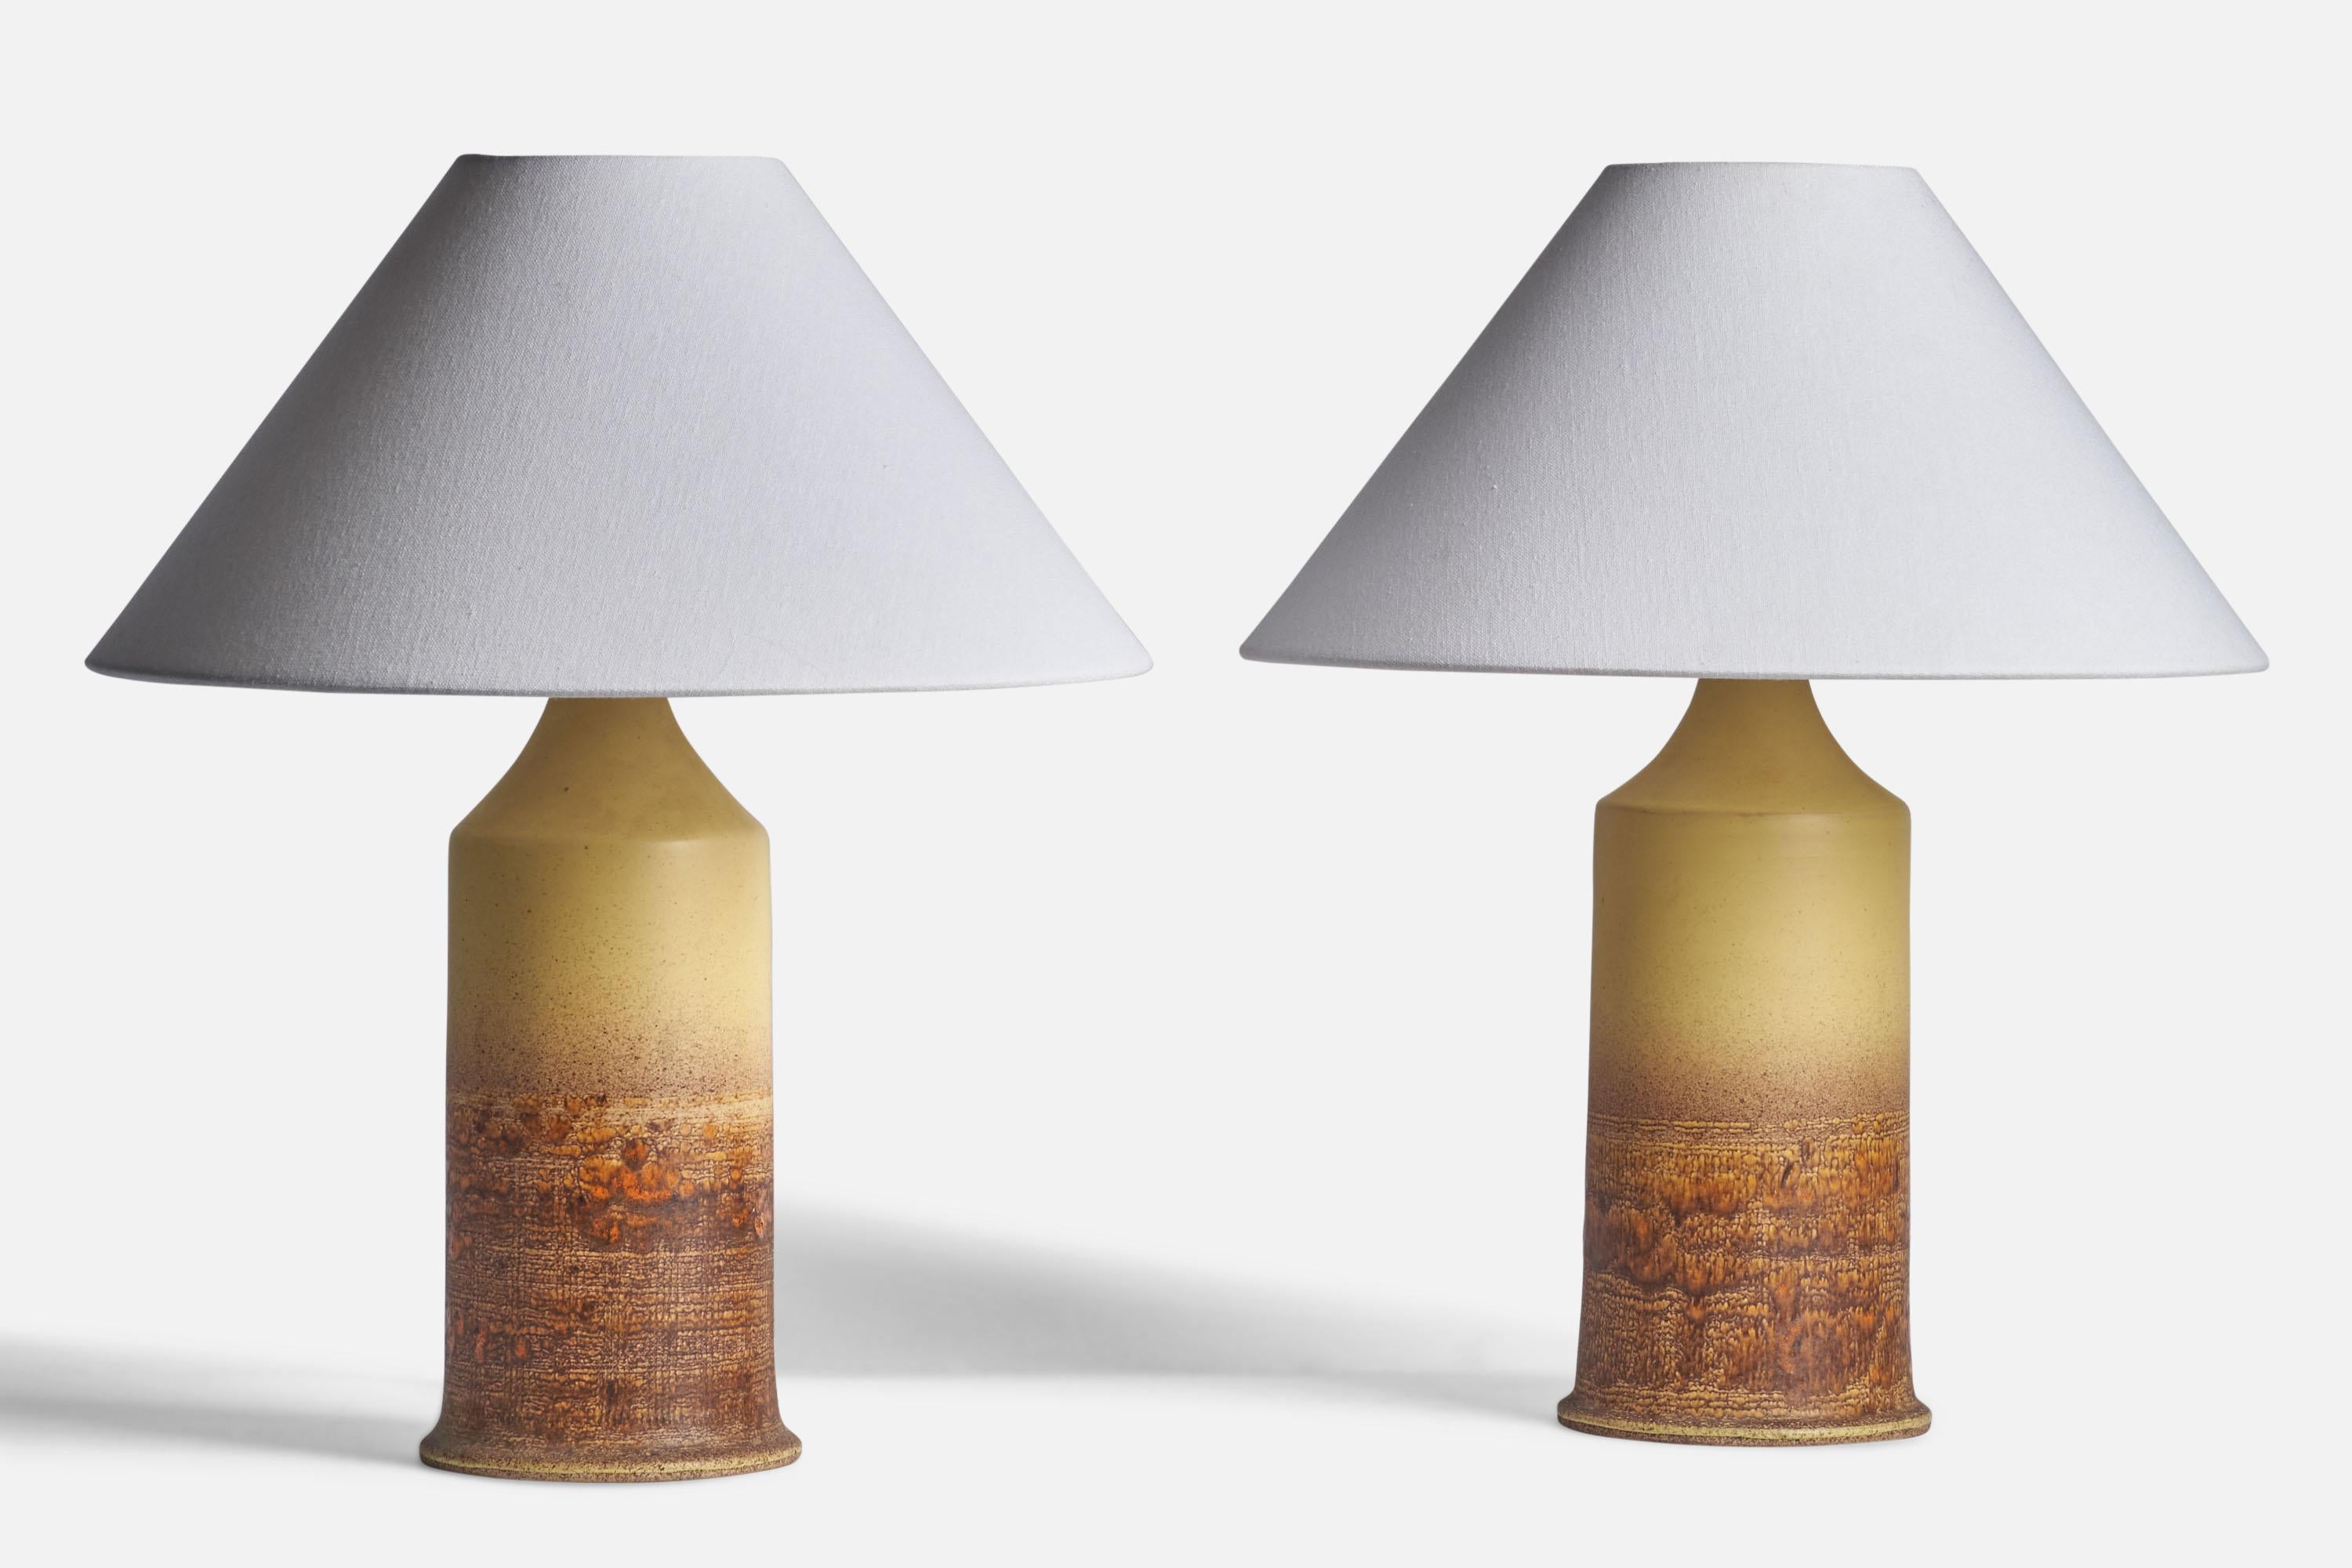 A pair of yellow and brown-glazed stoneware table lamps designed and produced by Tilgmans Keramik, Sweden, c. 1960s.

Dimensions of Lamp (inches): 14.5” H x 5.6” Diameter
Dimensions of Shade (inches): 4.5” Top Diameter x 15.75” Bottom Diameter x